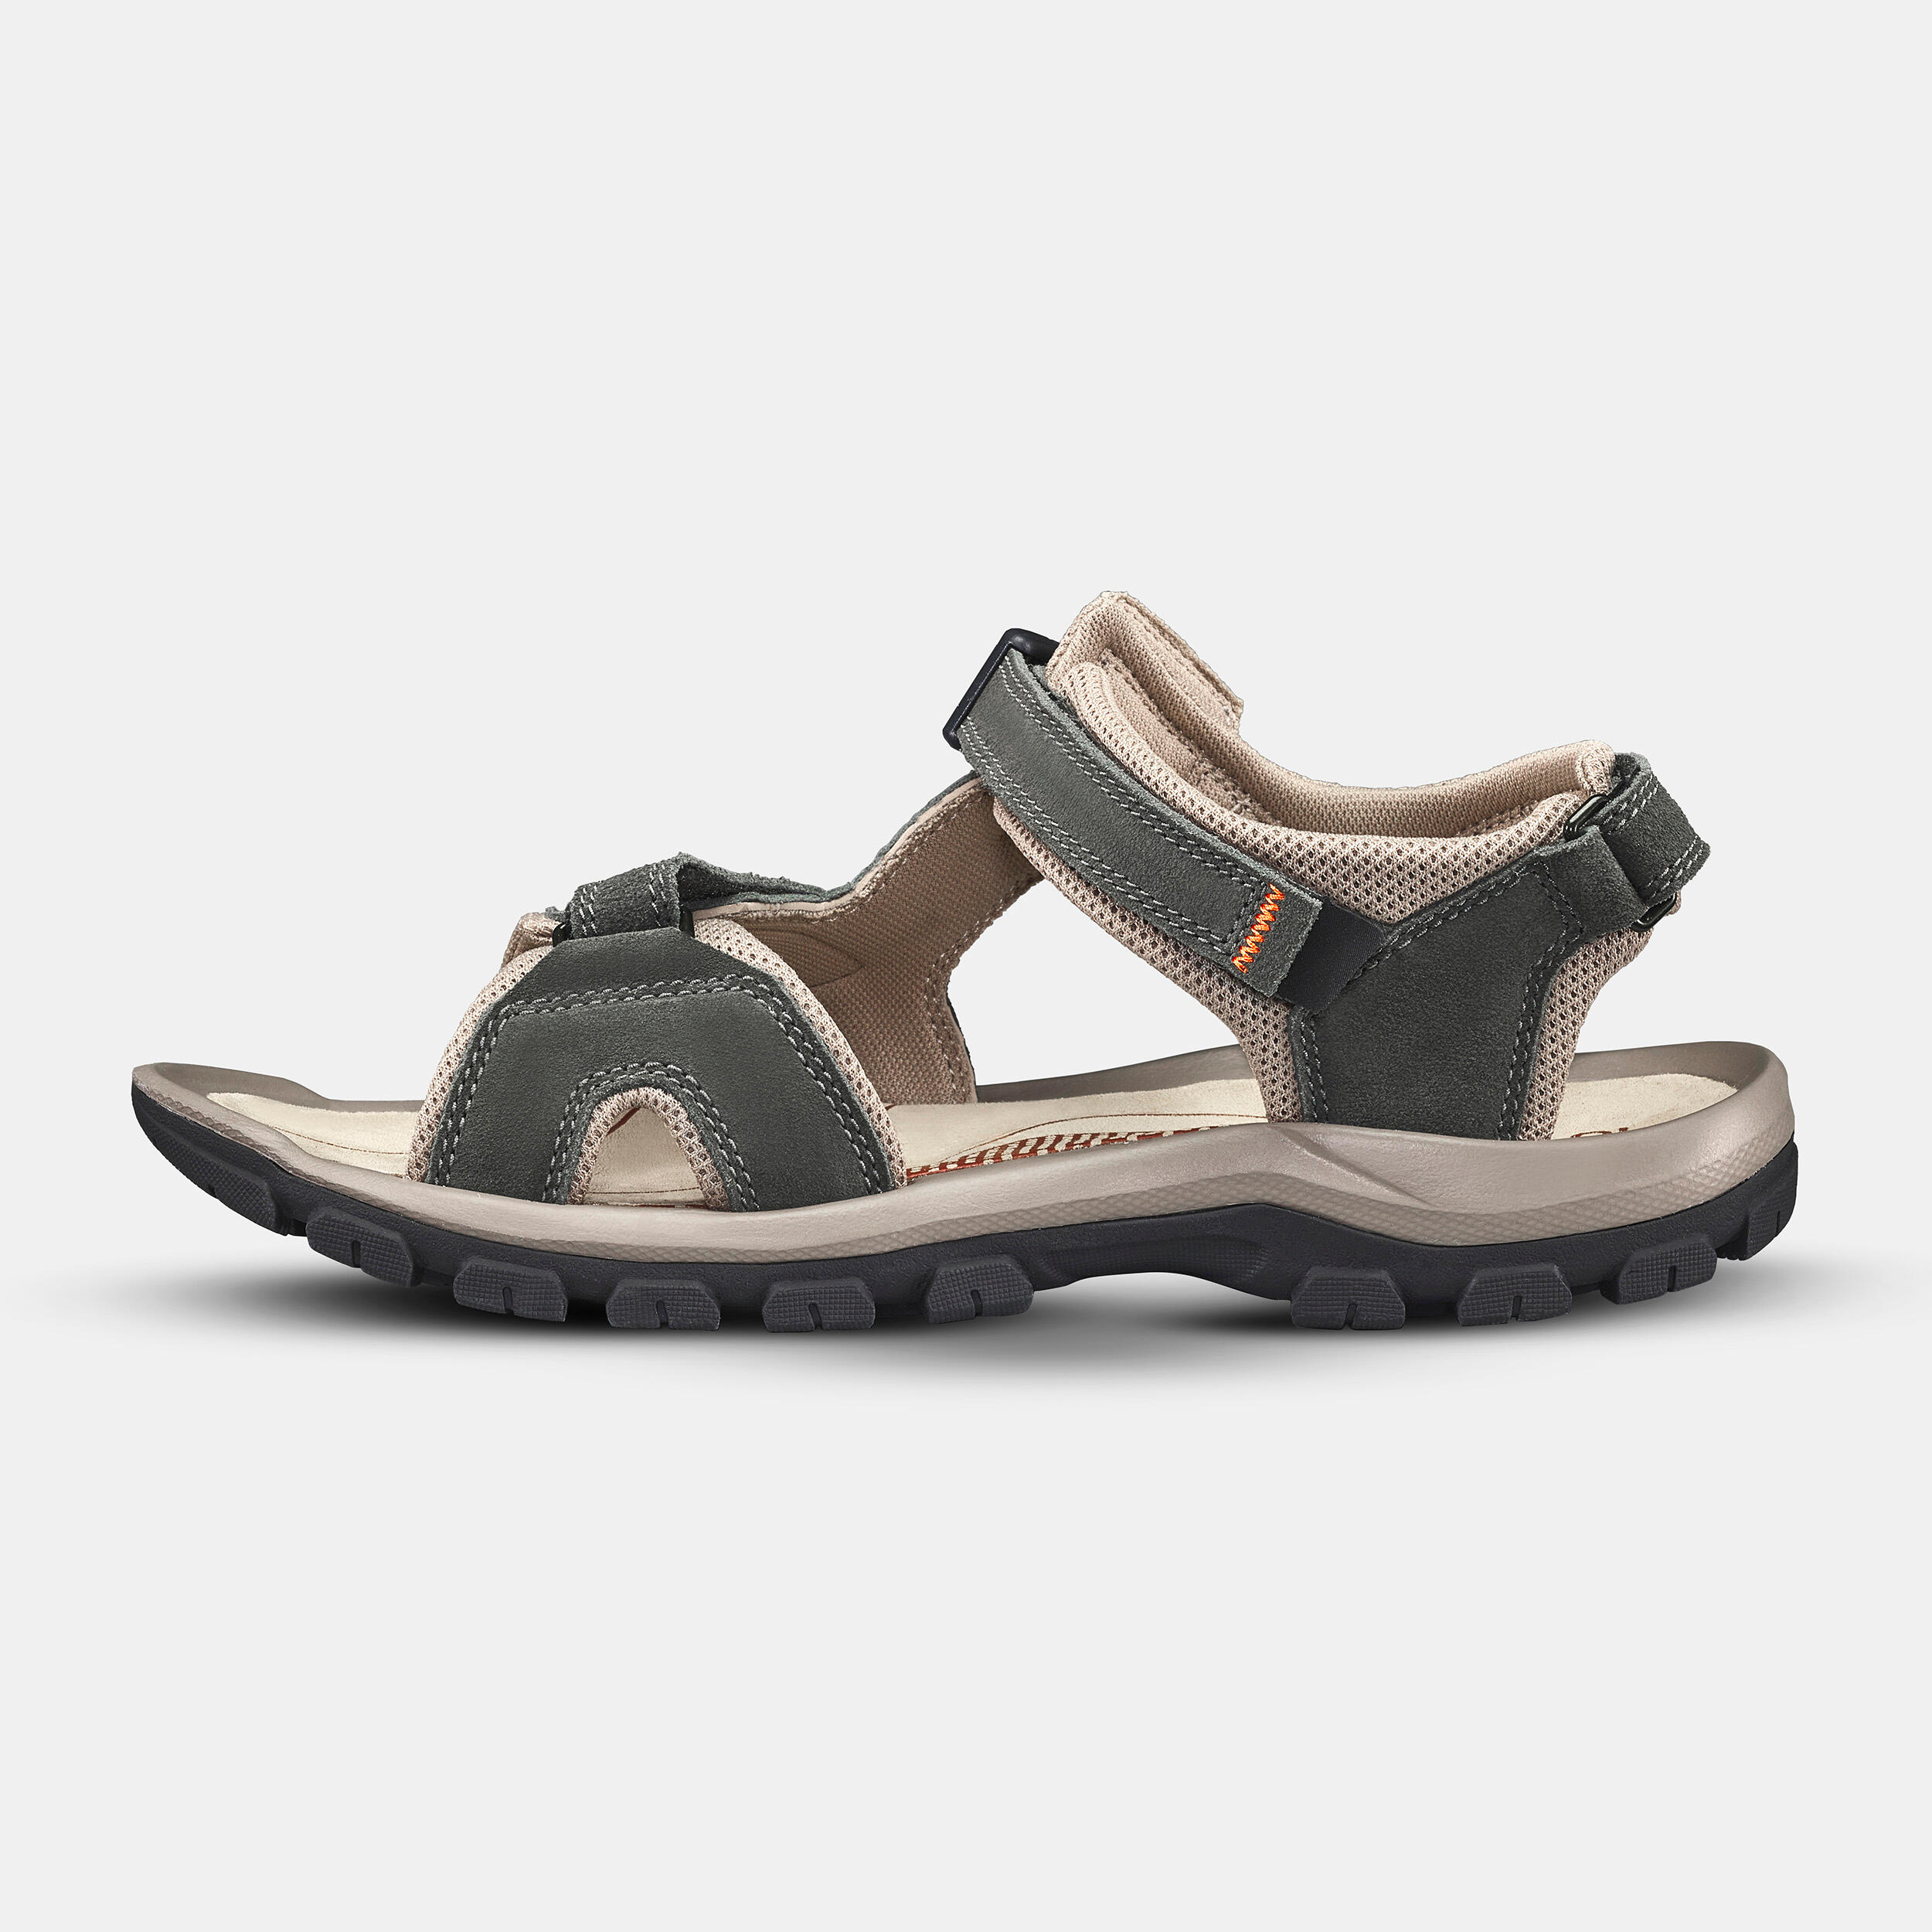 Miraatti Men's Yellow Leather Sandals and Floaters - 11 UK (6031-21) :  Amazon.in: Fashion